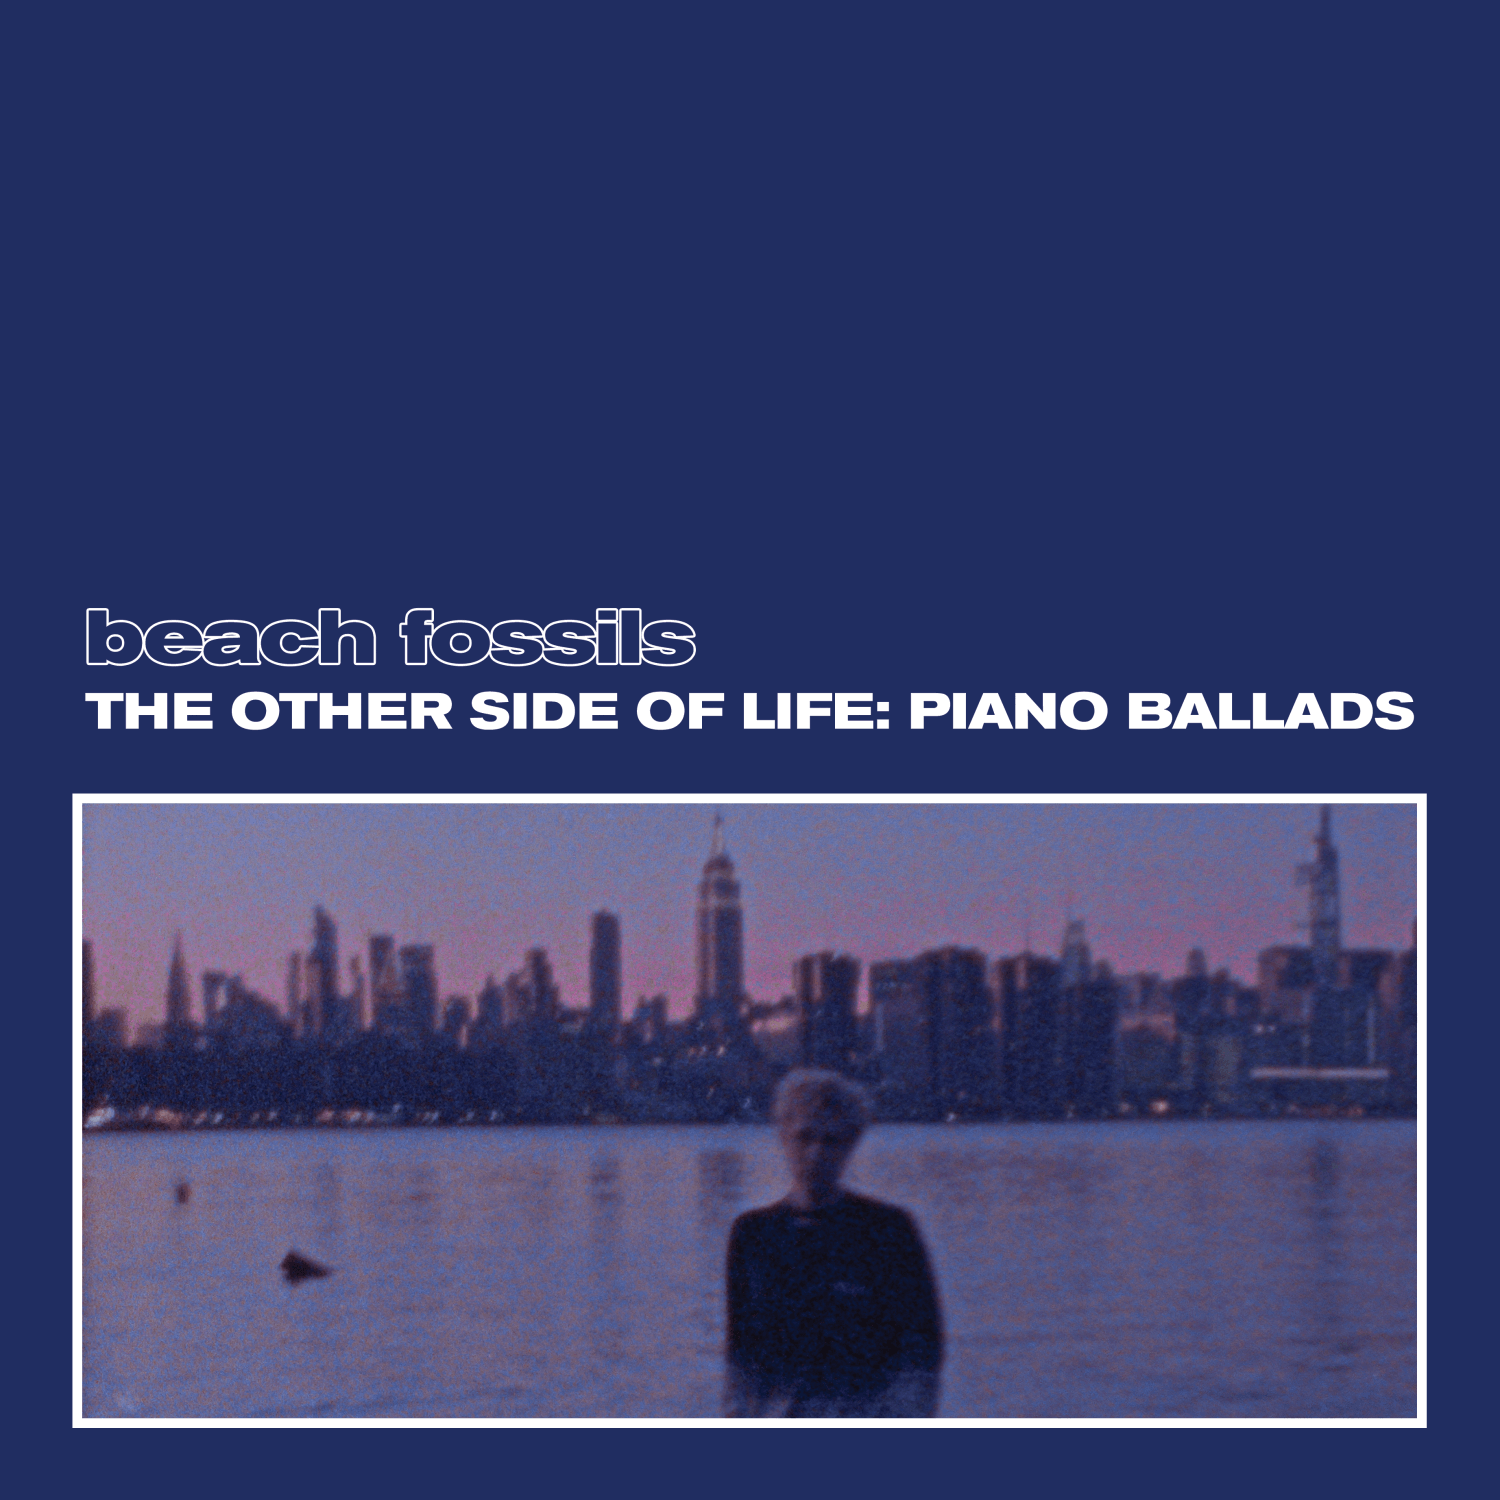 Beach Fossils Announce New Album,The Other Side of Life: Piano Ballads, will drop on November 19, 2021 via Bayonet Records